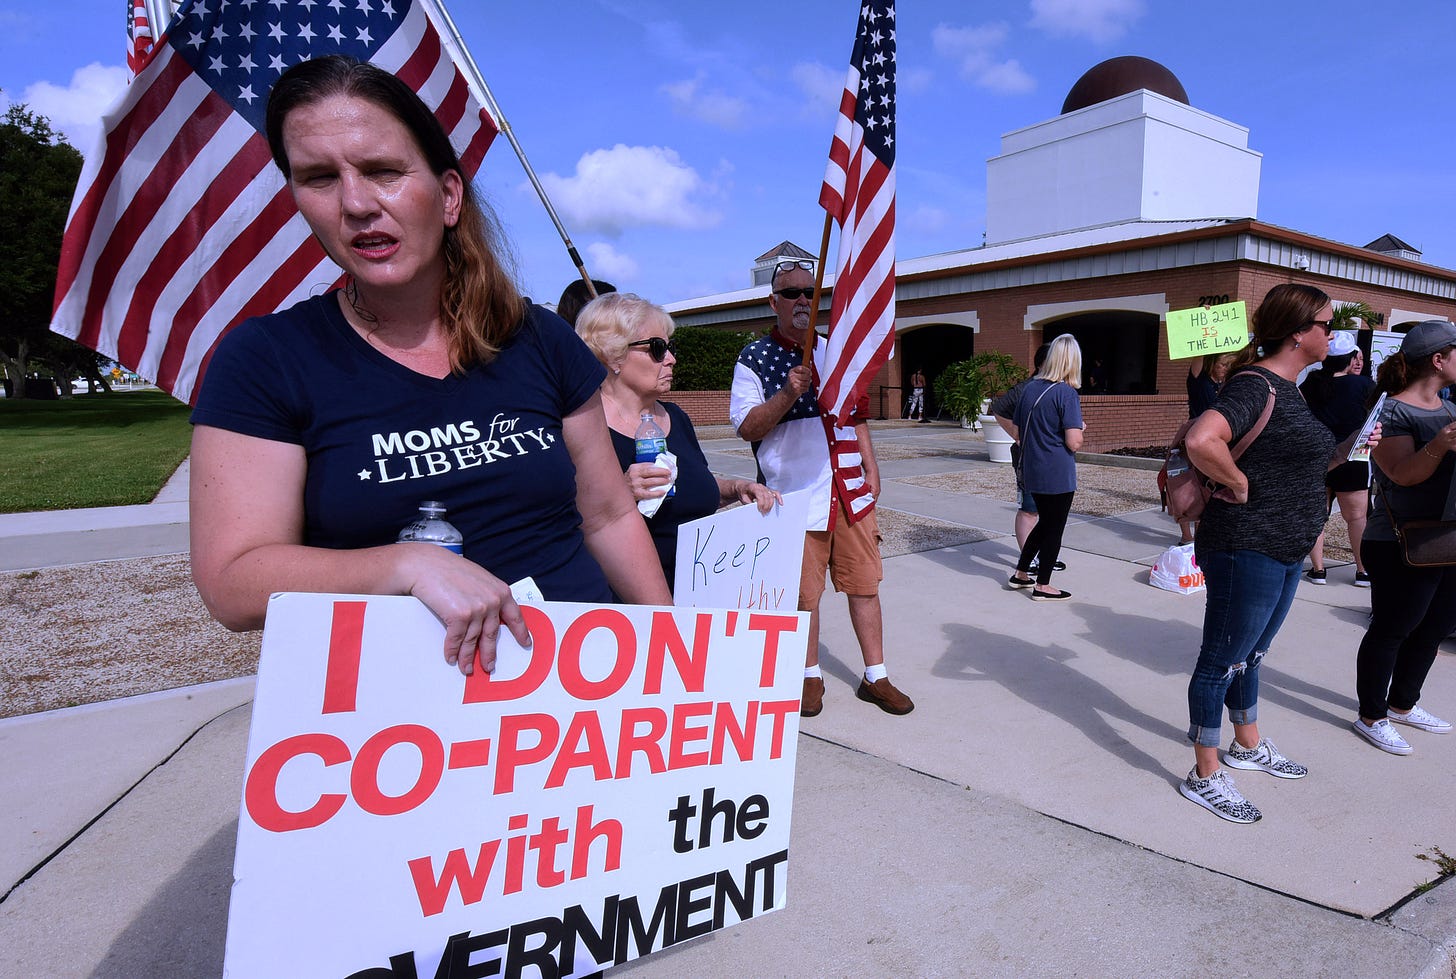 Moms for Liberty: Where are they, and are they winning? | Brookings